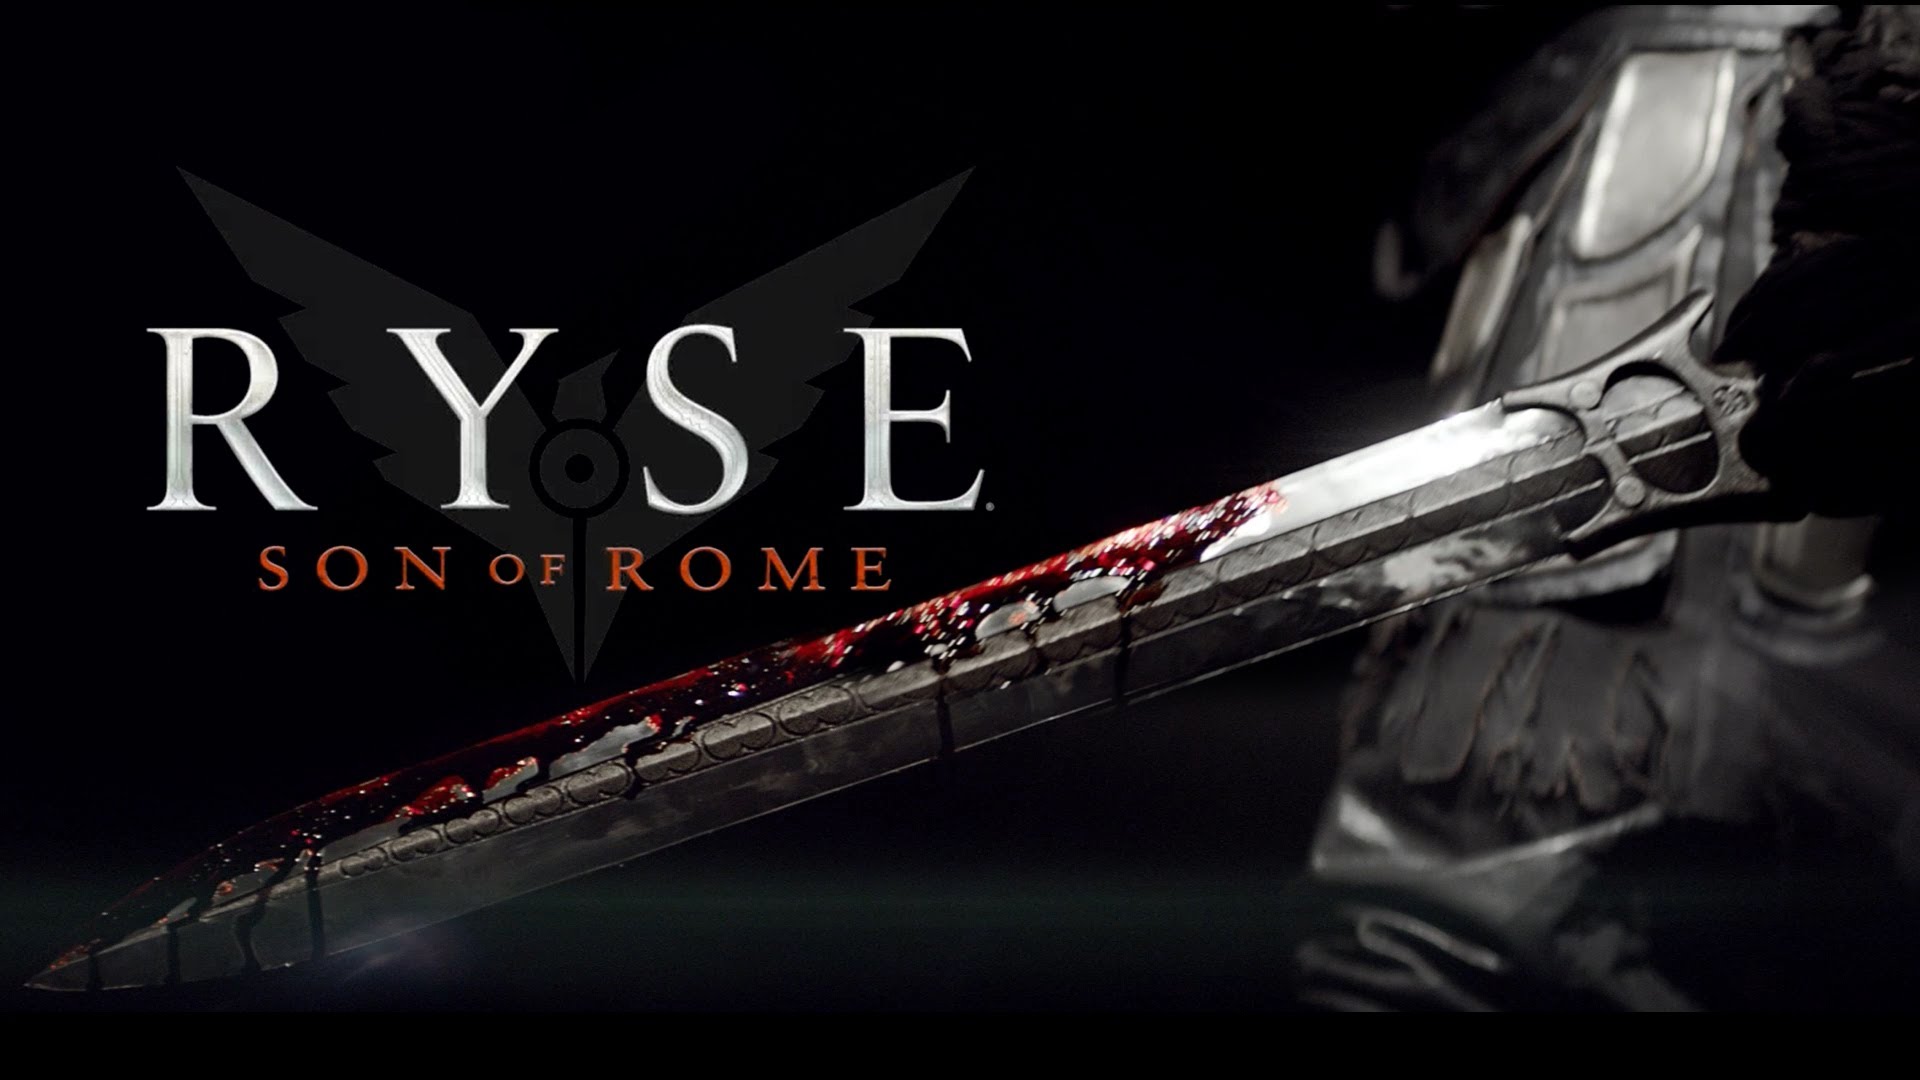 ryse: son of rome, video game